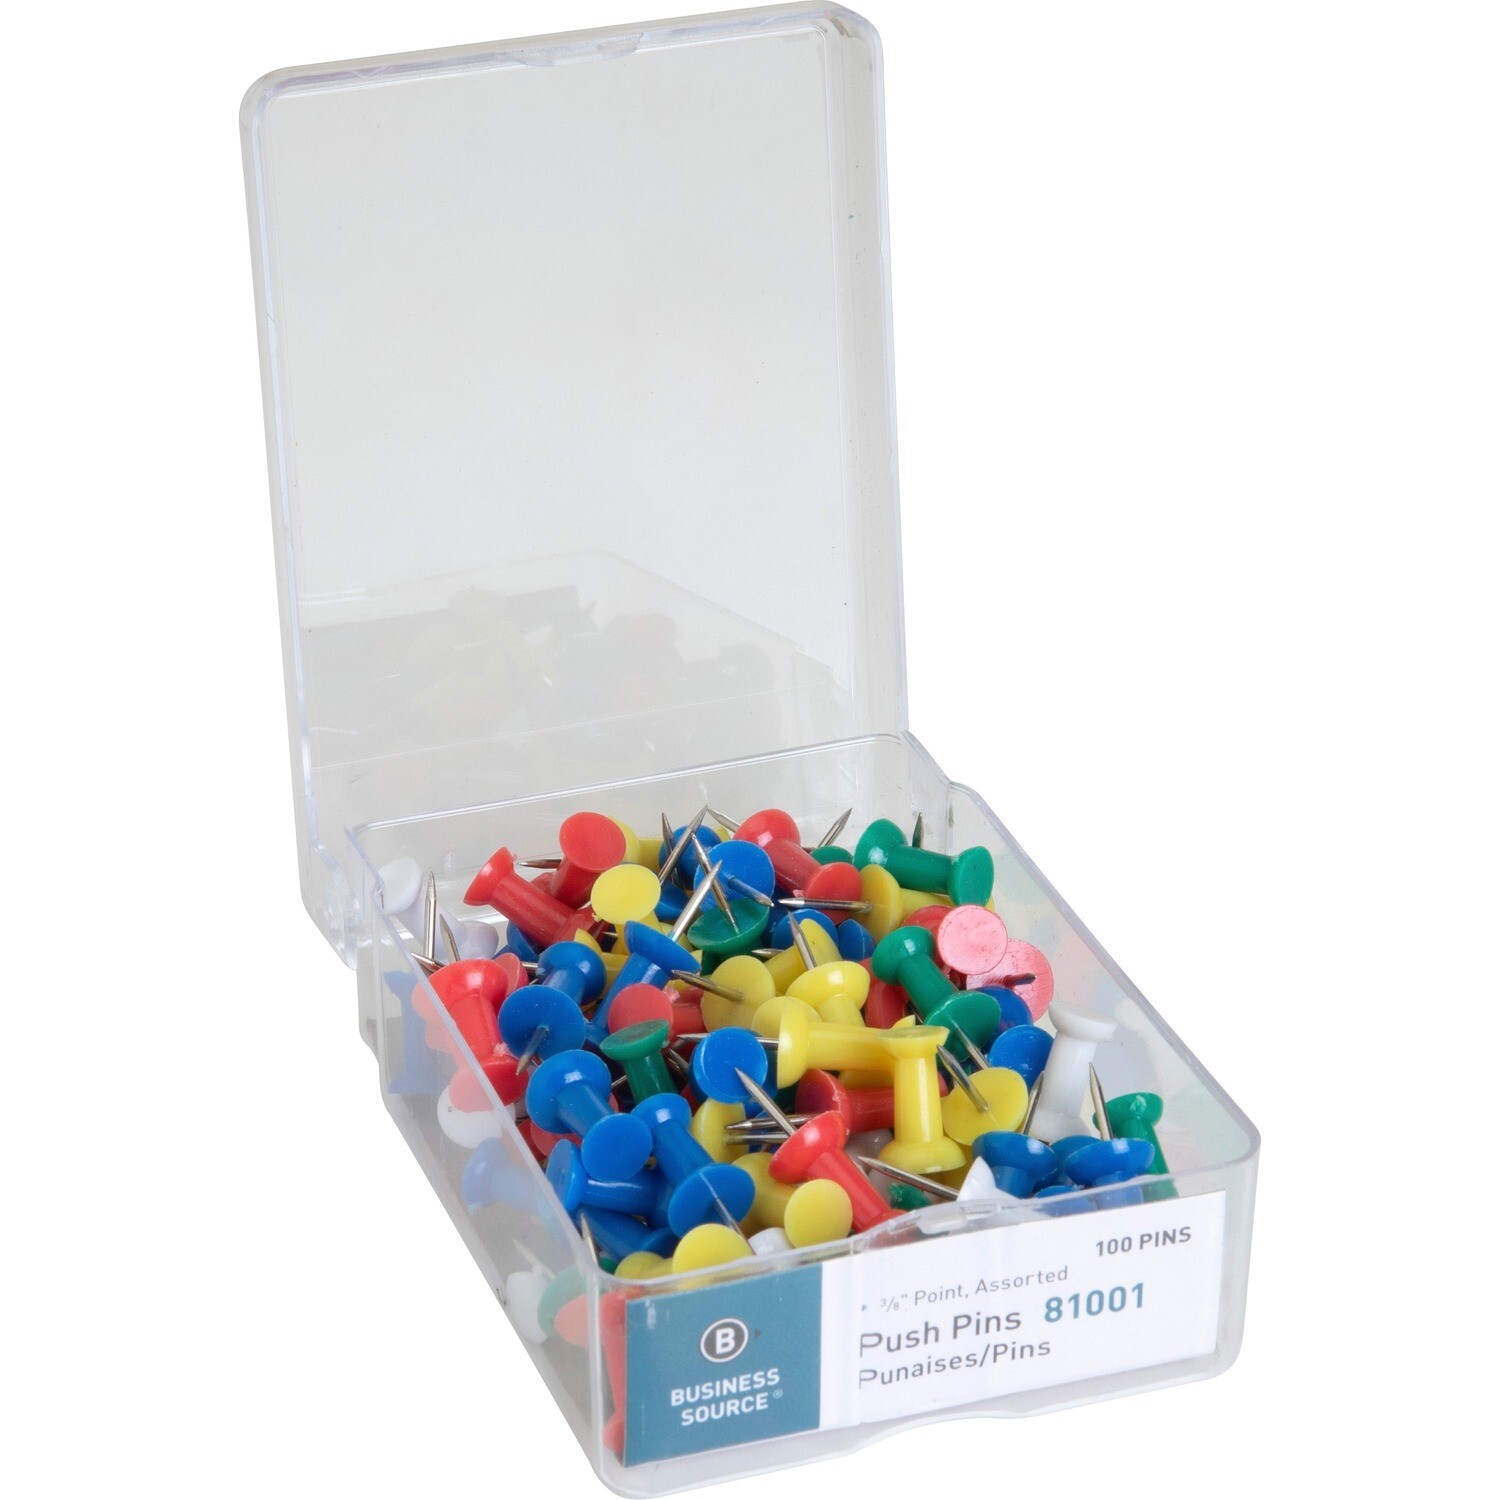 Push Pins, 1/2" 100 Pack, Assorted Colours, Business Source